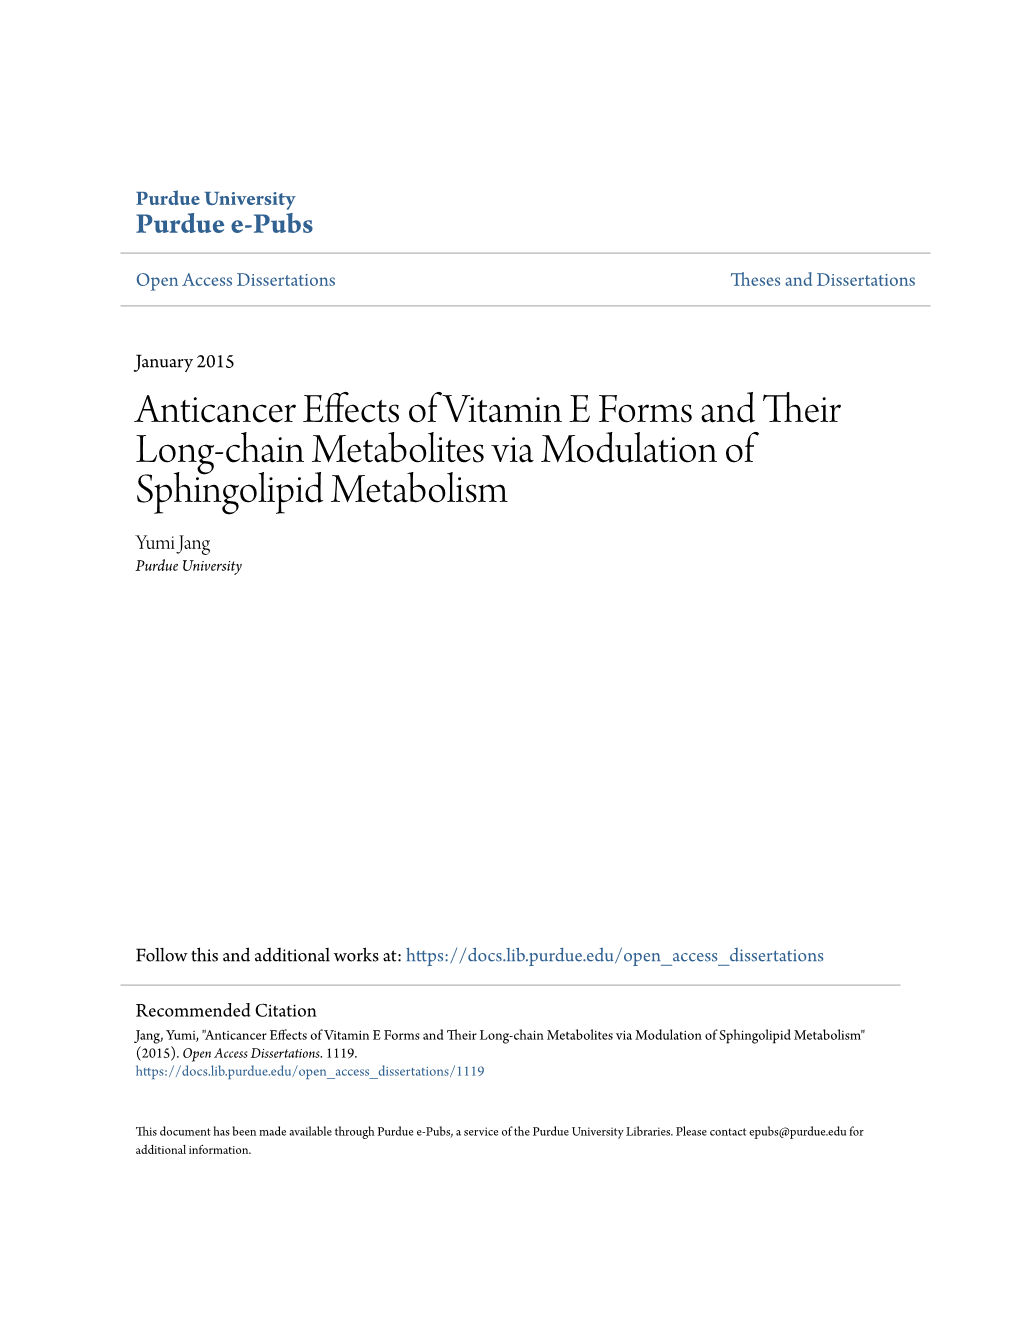 Anticancer Effects of Vitamin E Forms and Their Long-Chain Metabolites Via Modulation of Sphingolipid Metabolism Yumi Jang Purdue University